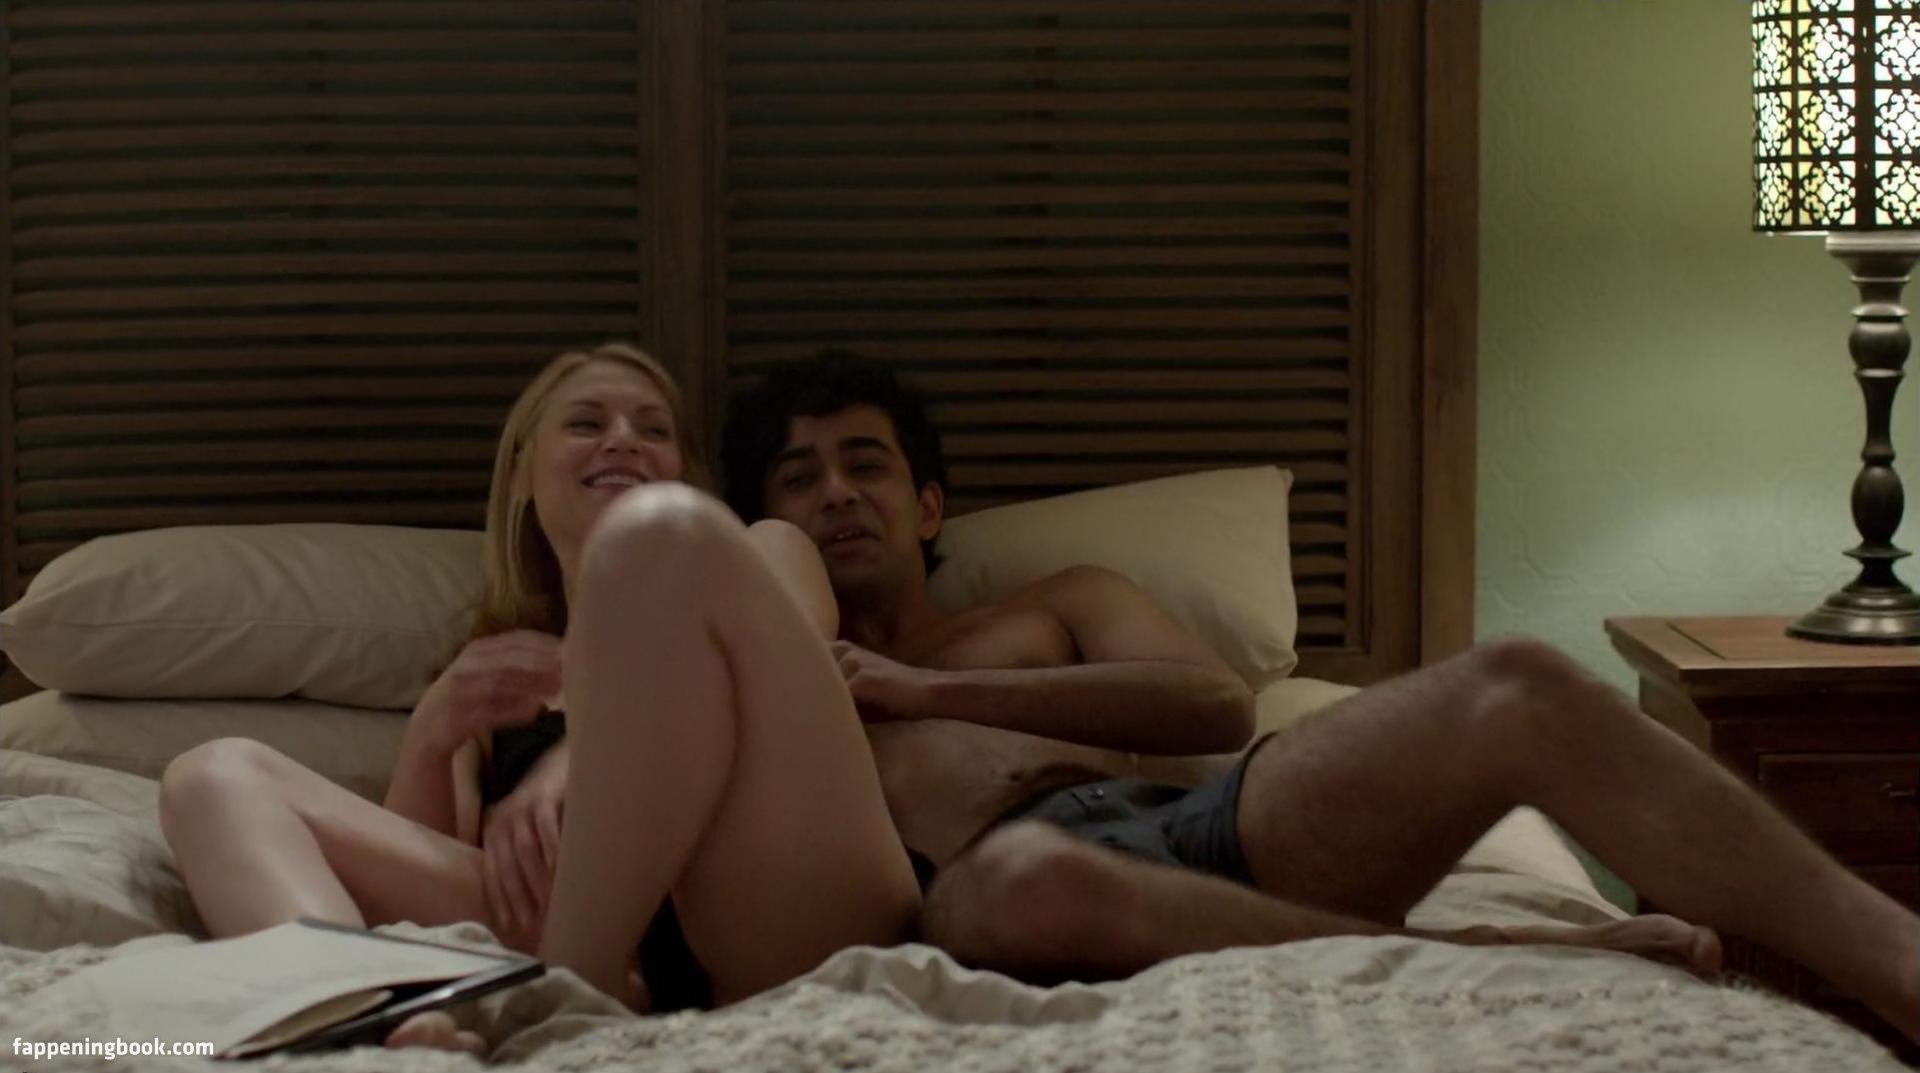 Claire Danes Nude, The Fappening - Photo #128538 - FappeningBook.